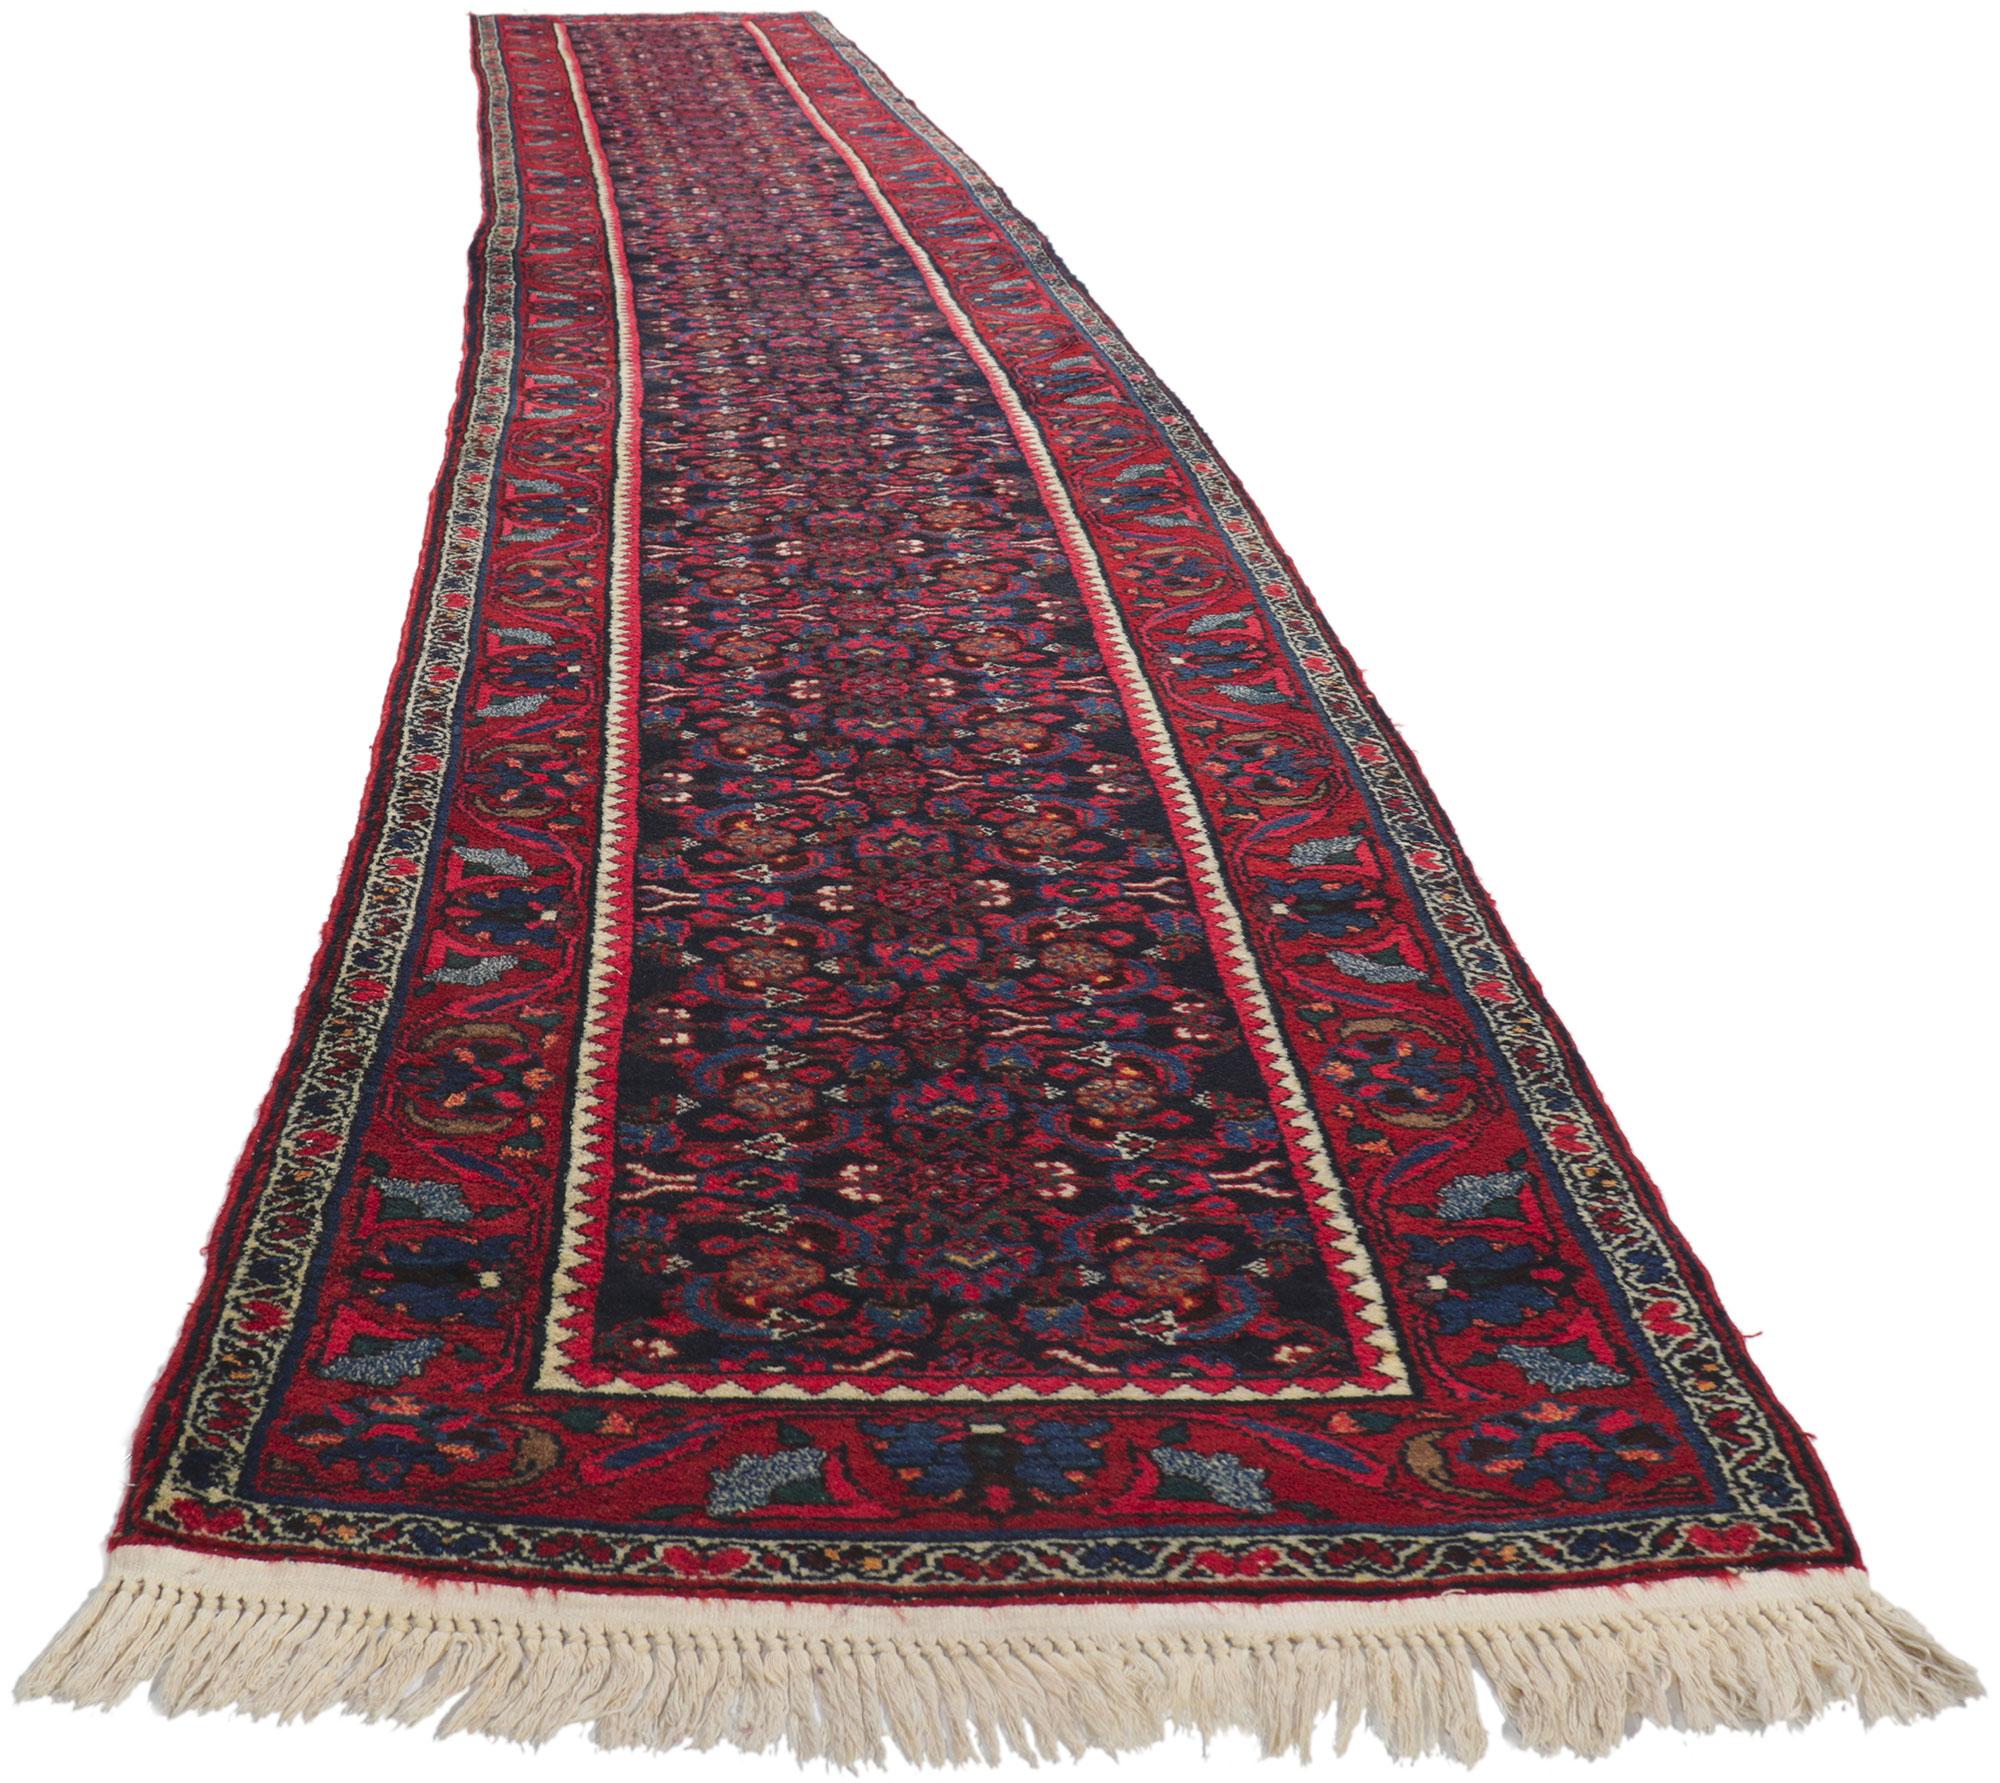 78452 Antique Persian malayer runner, 02'11 x 17'04.
With its effortless beauty, incredible detail and texture, this hand knotted wool antique Persian Malayer runner is a captivating vision of woven beauty. The classic Herati design and refined